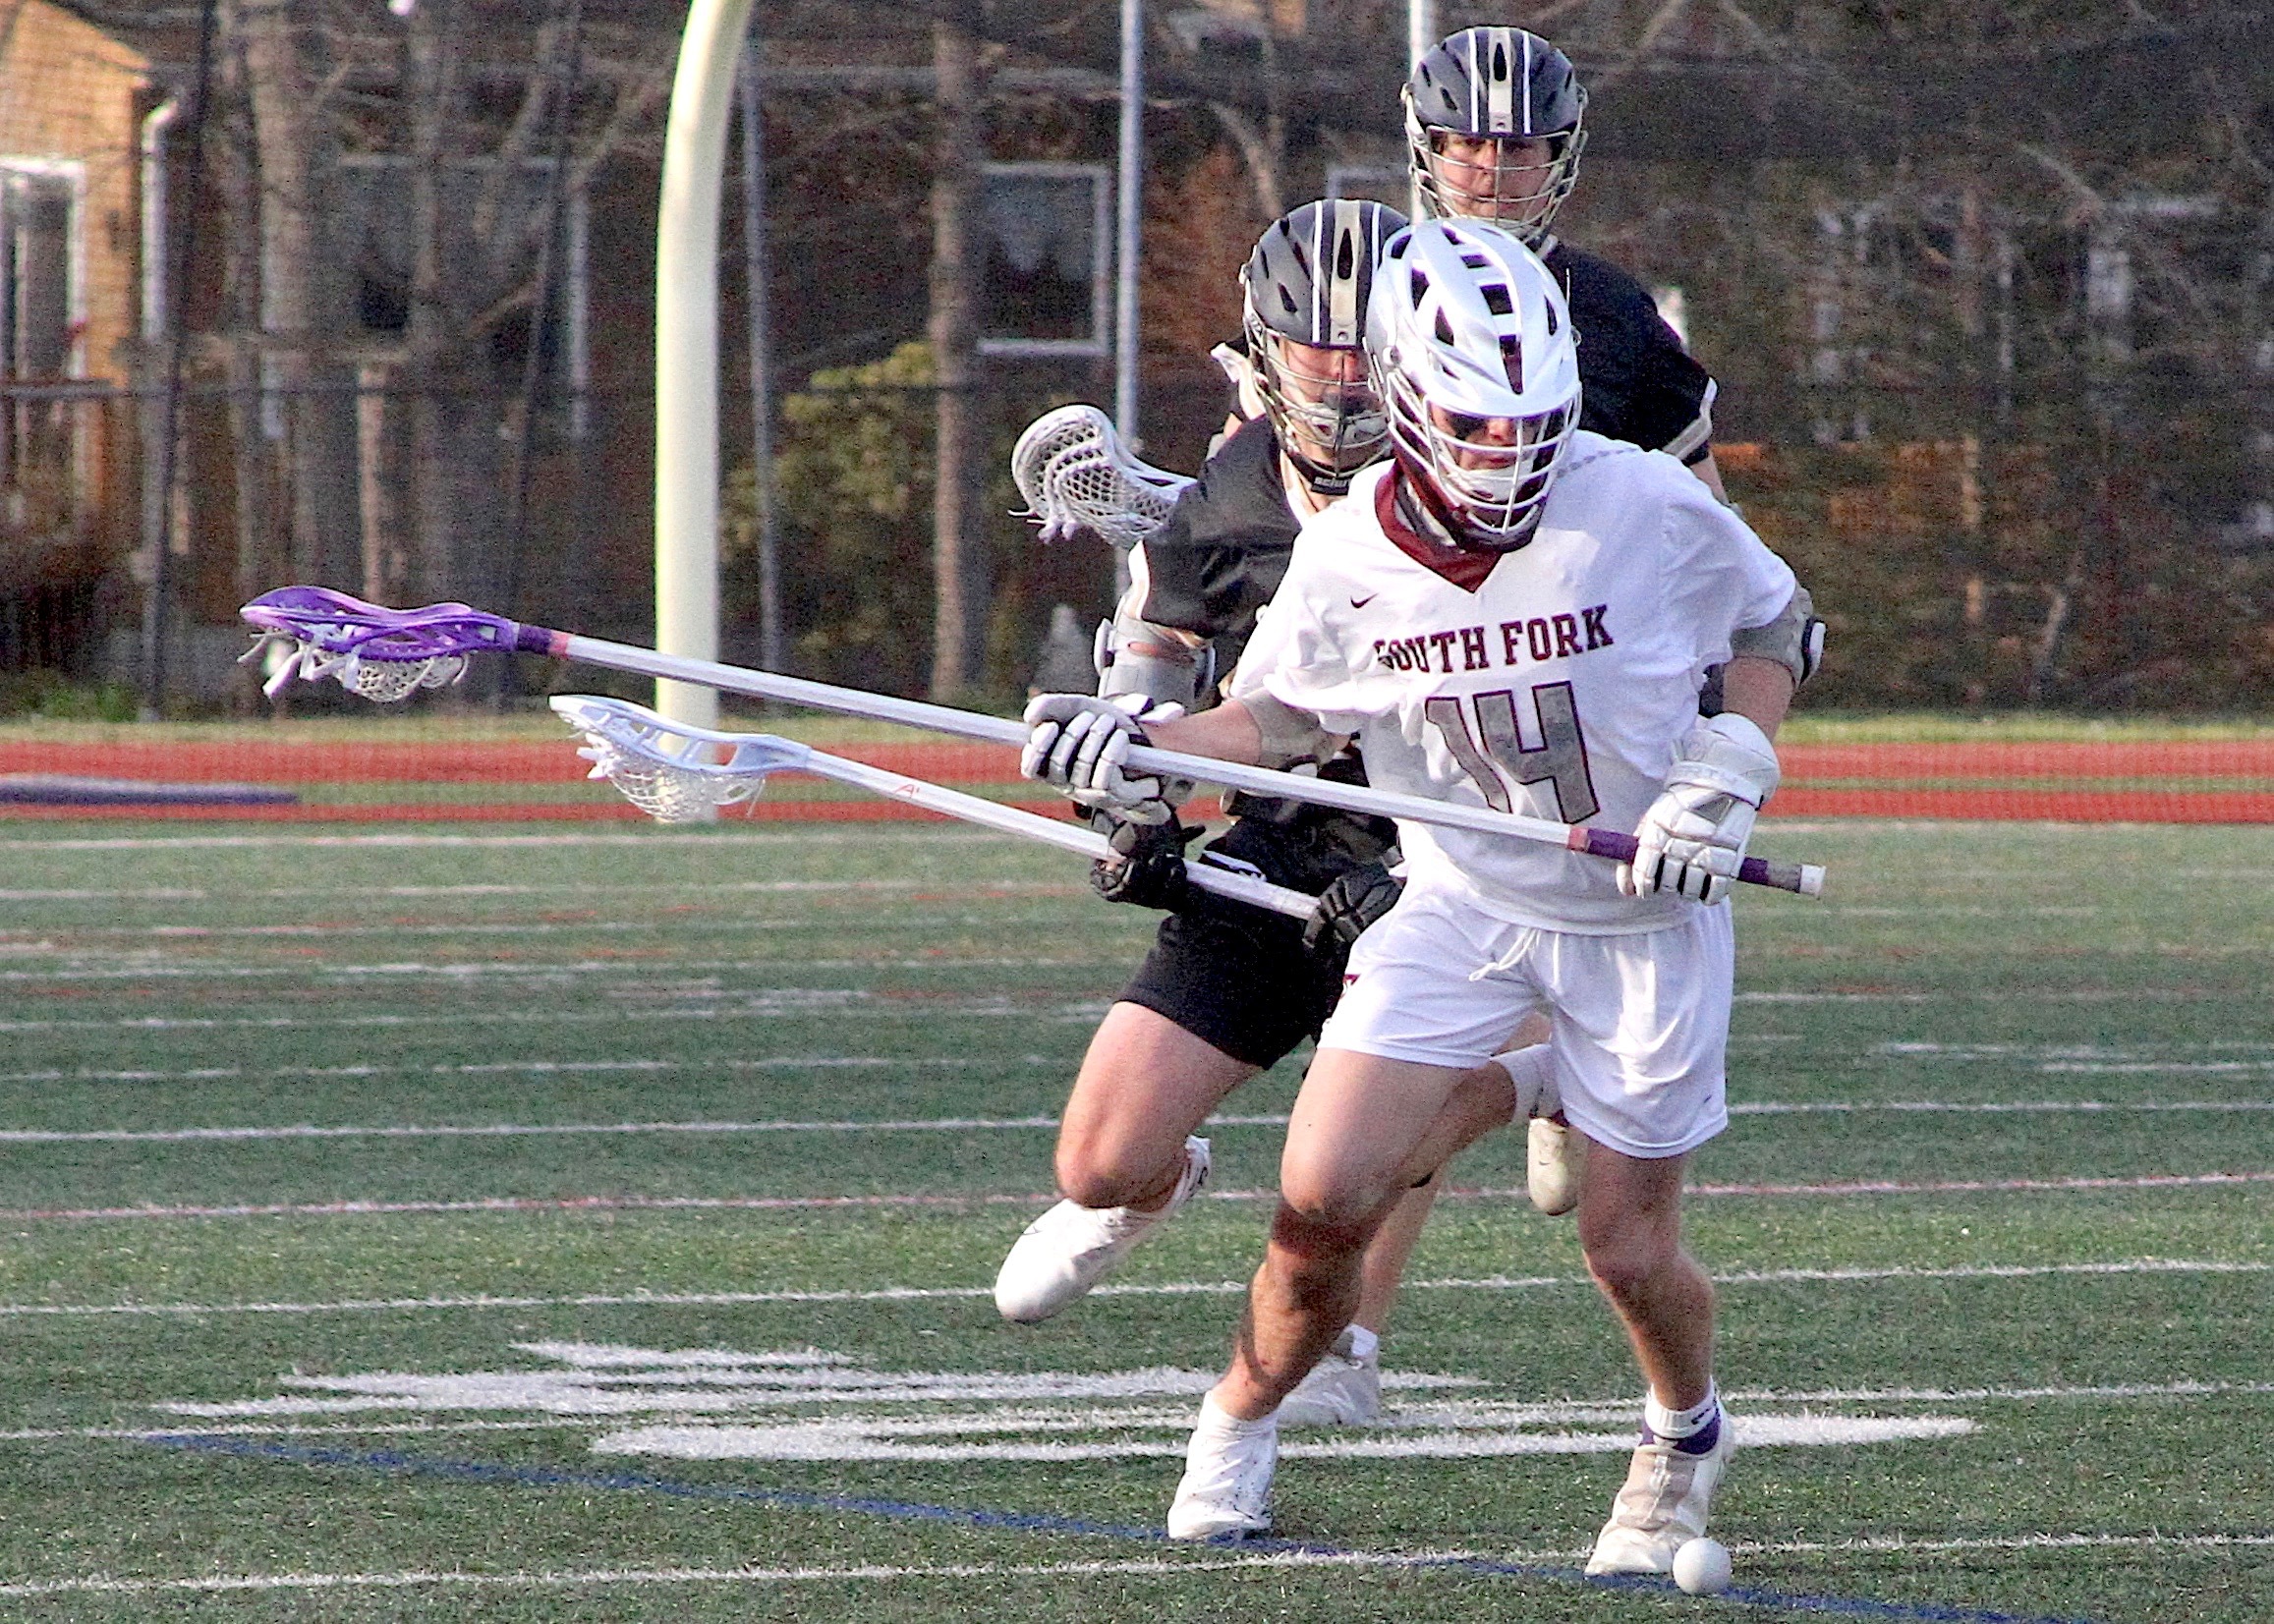 Sophomore longstick midfielder prepares to reach for one of his many ground balls. DESIRÉE KEEGAN